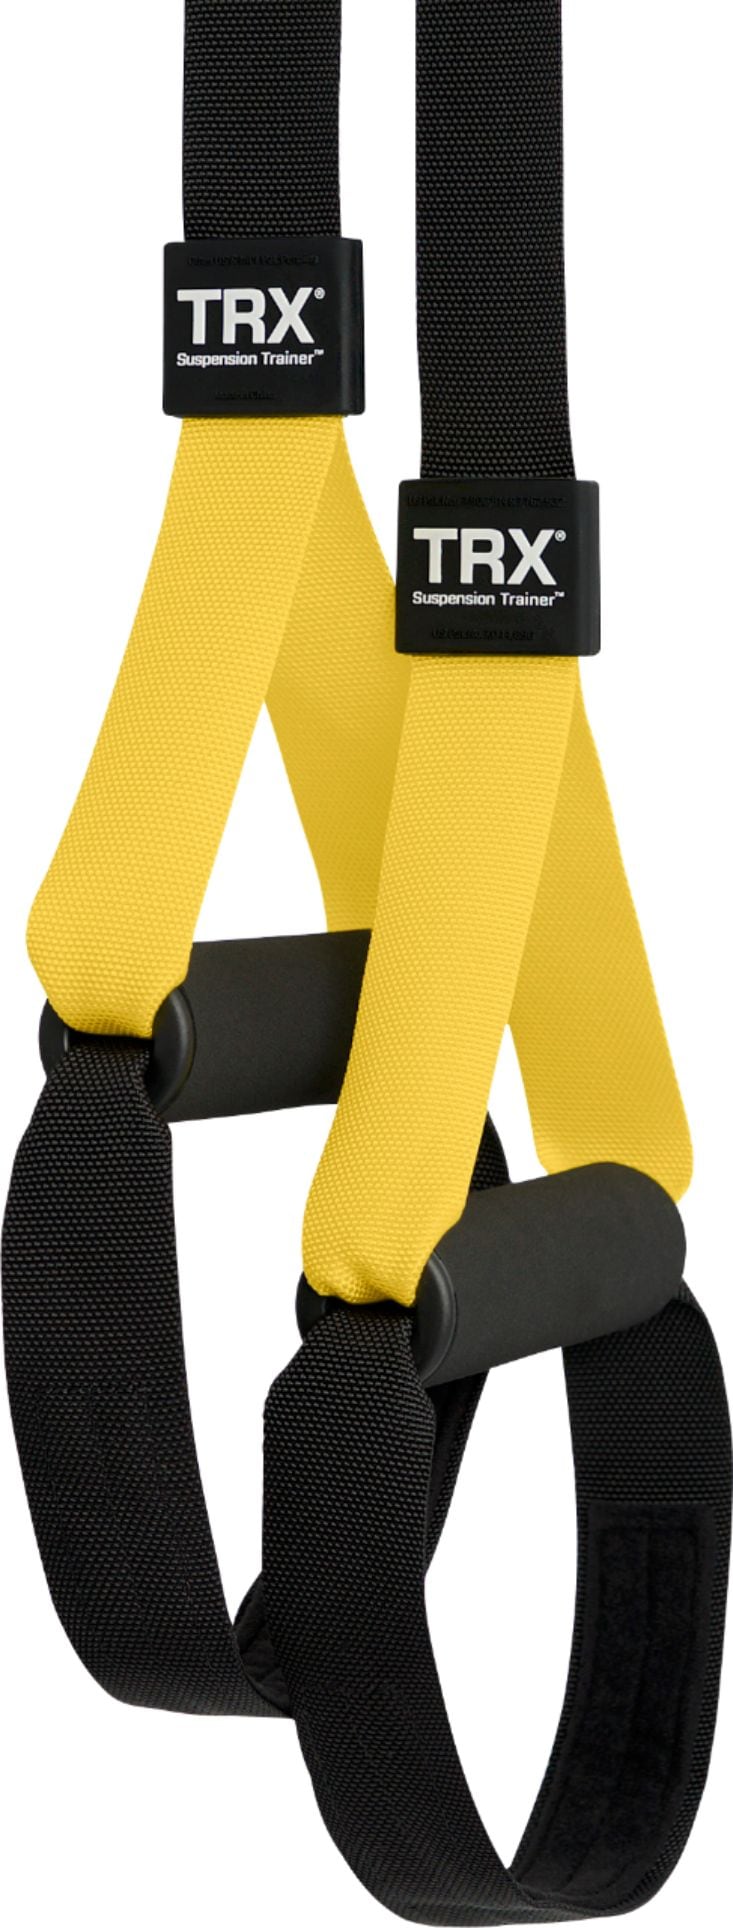 TRX - Strong System Suspension Trainer - Black/Yellow_1